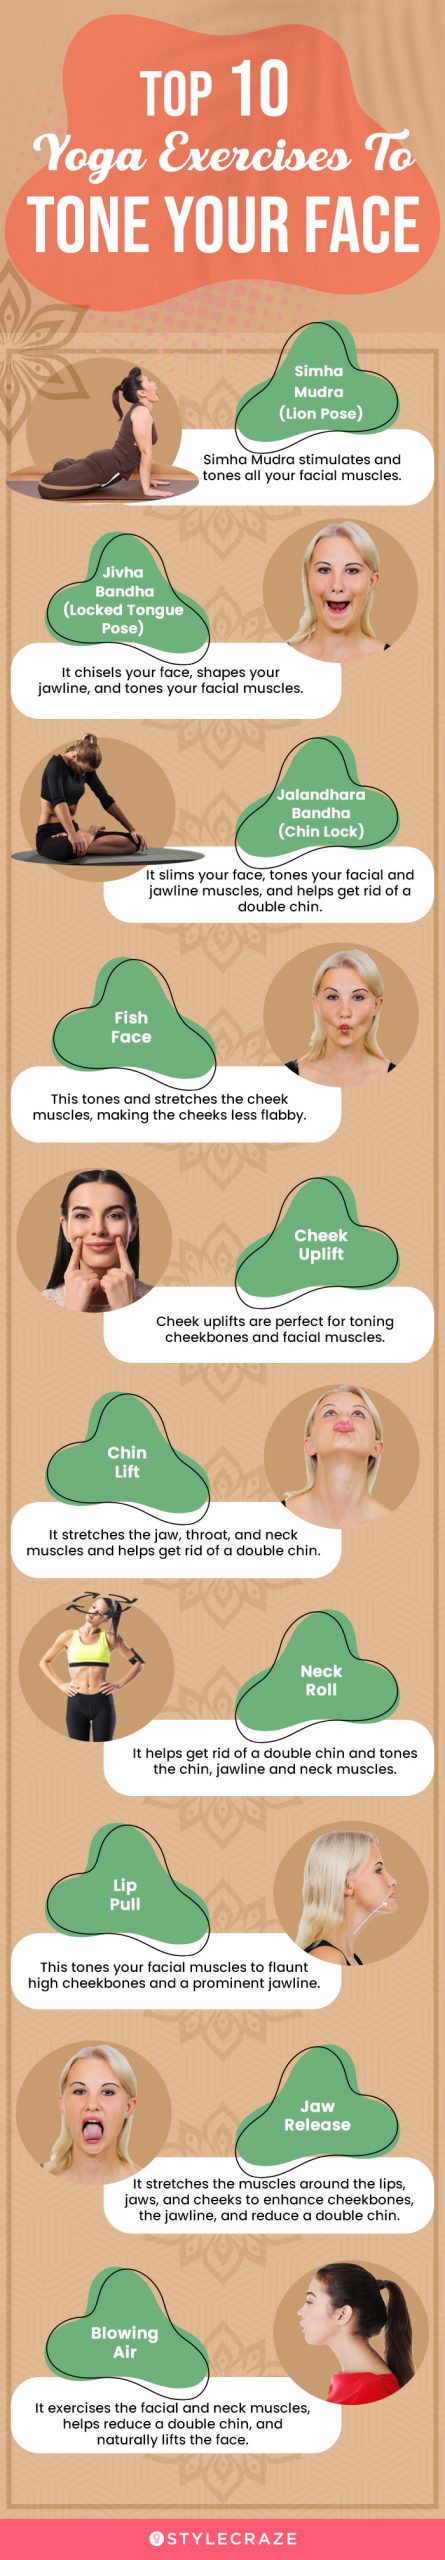 12 Yoga Exercises For Slimming Your Face  